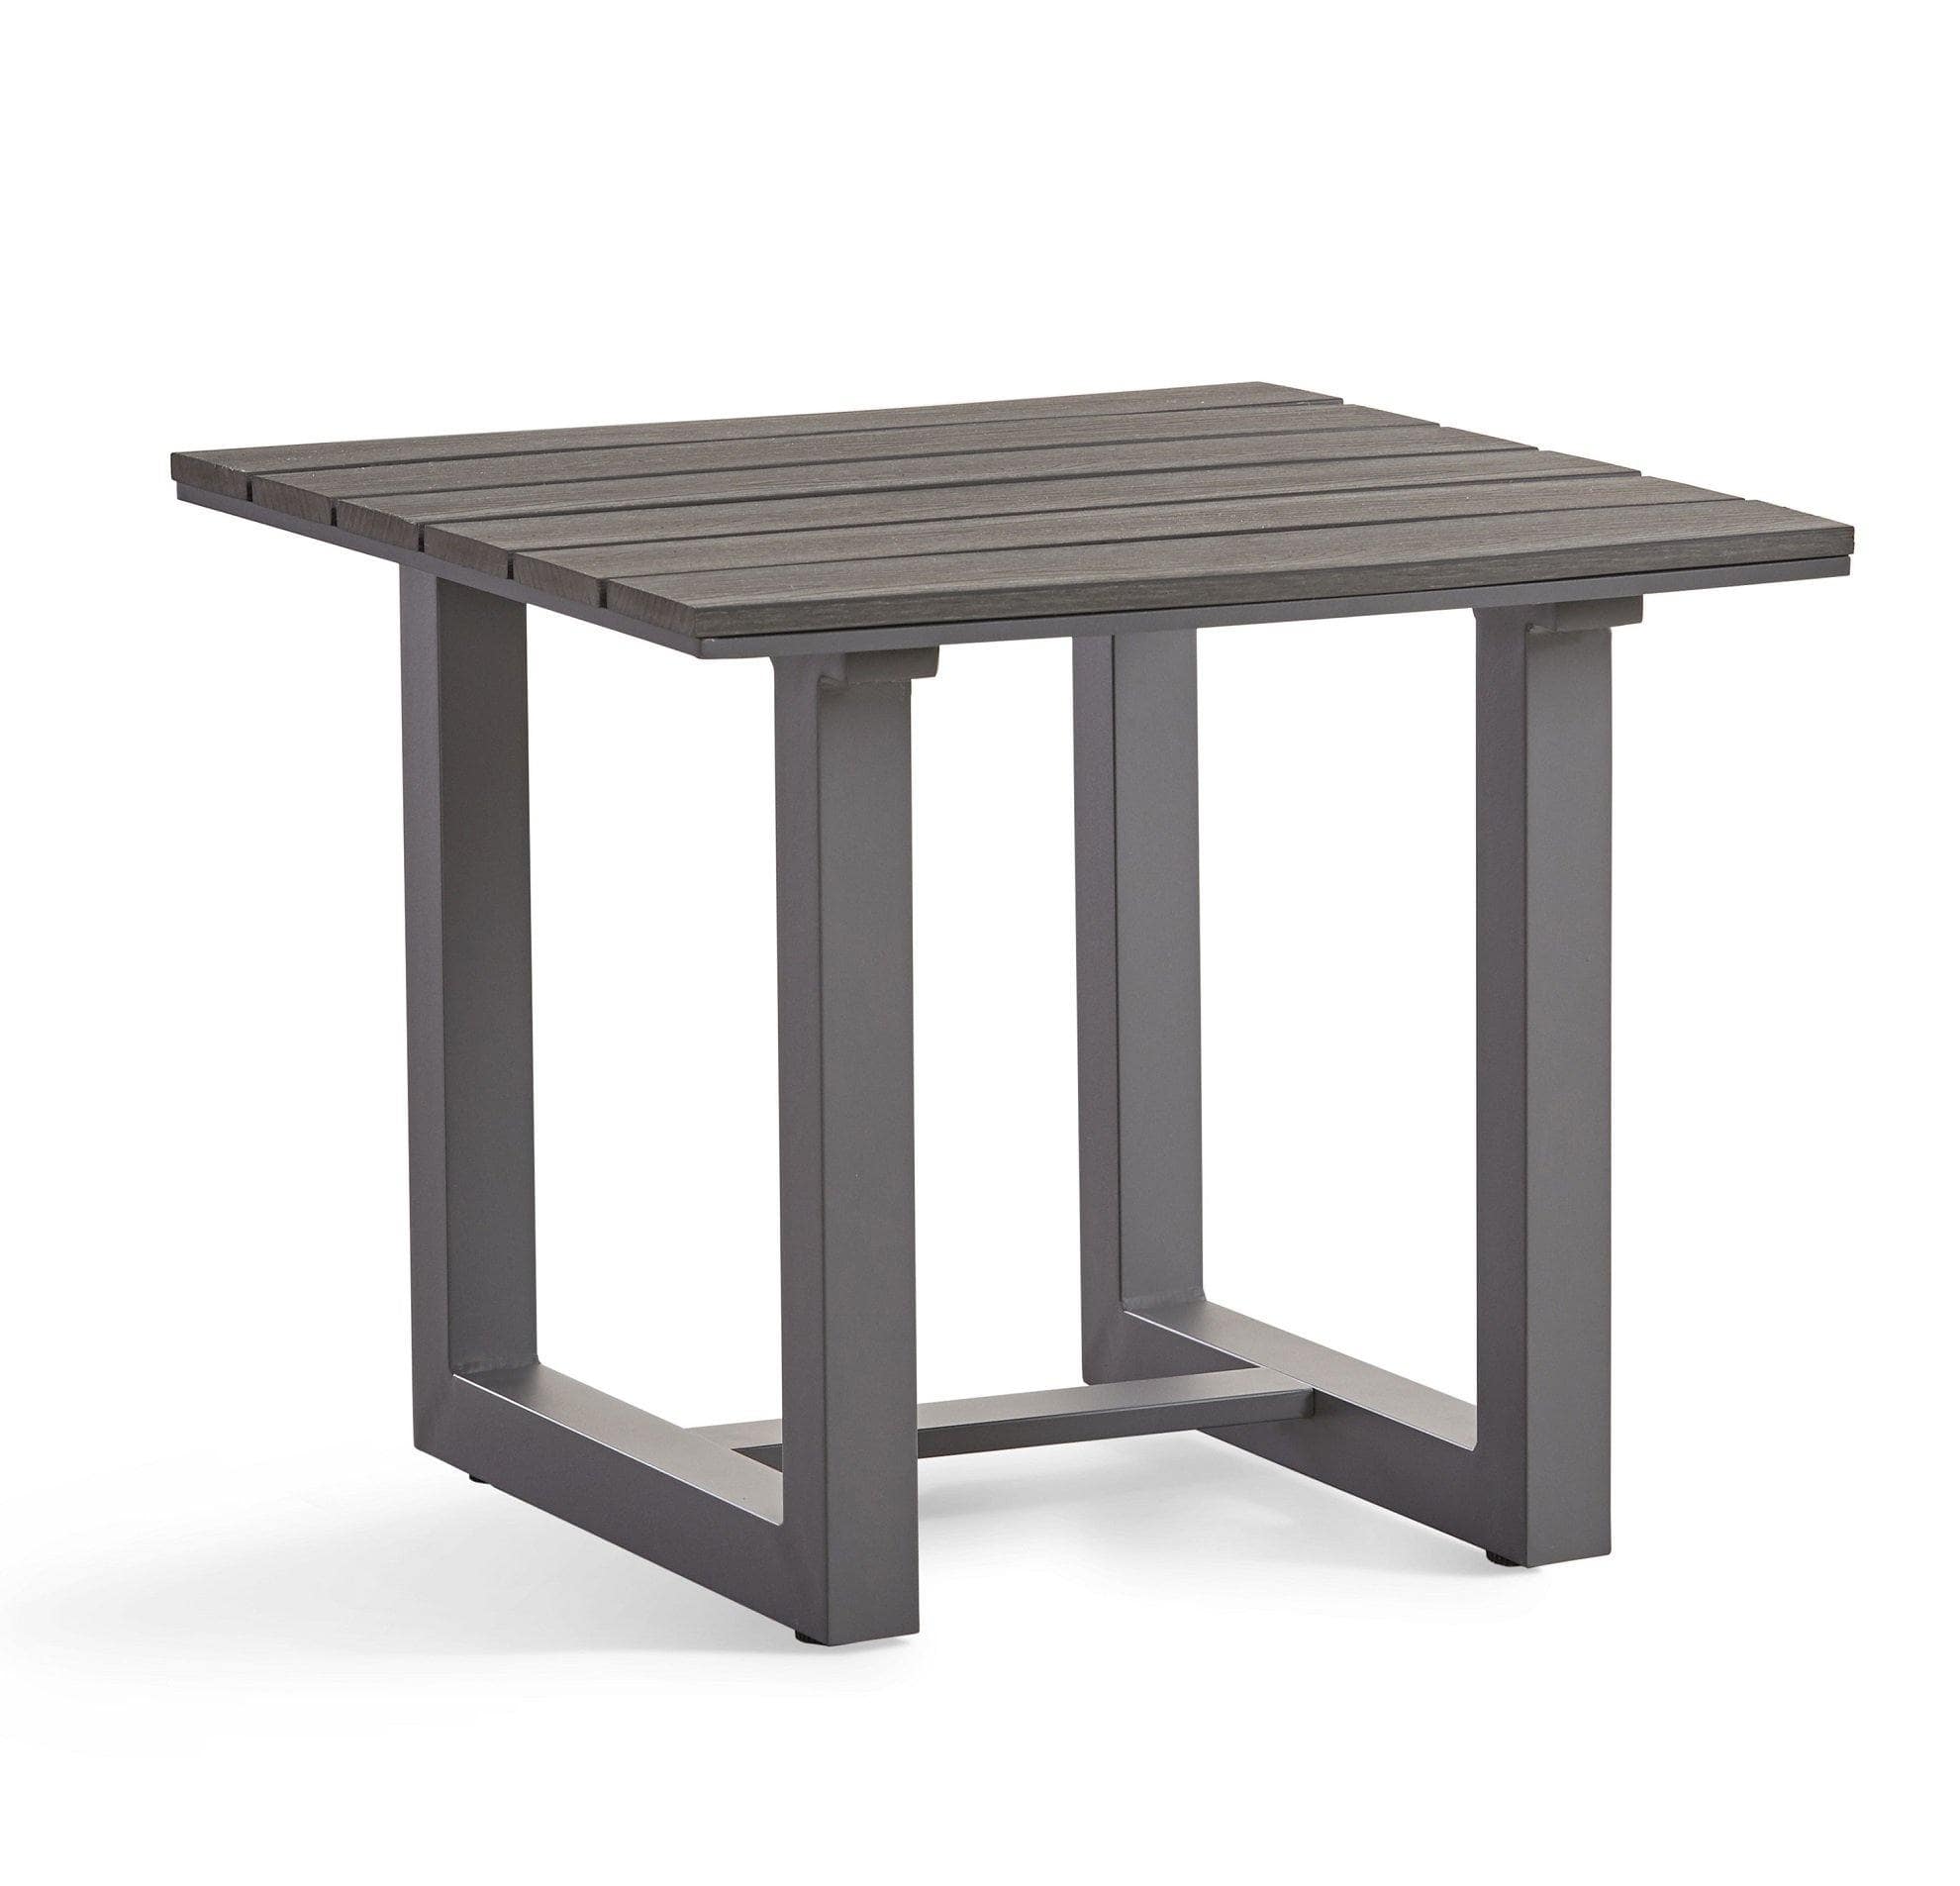 South Sea Outdoor Living Outdoor Coffee Table Kingston End Table by South Sea Outdoor Living - 73241